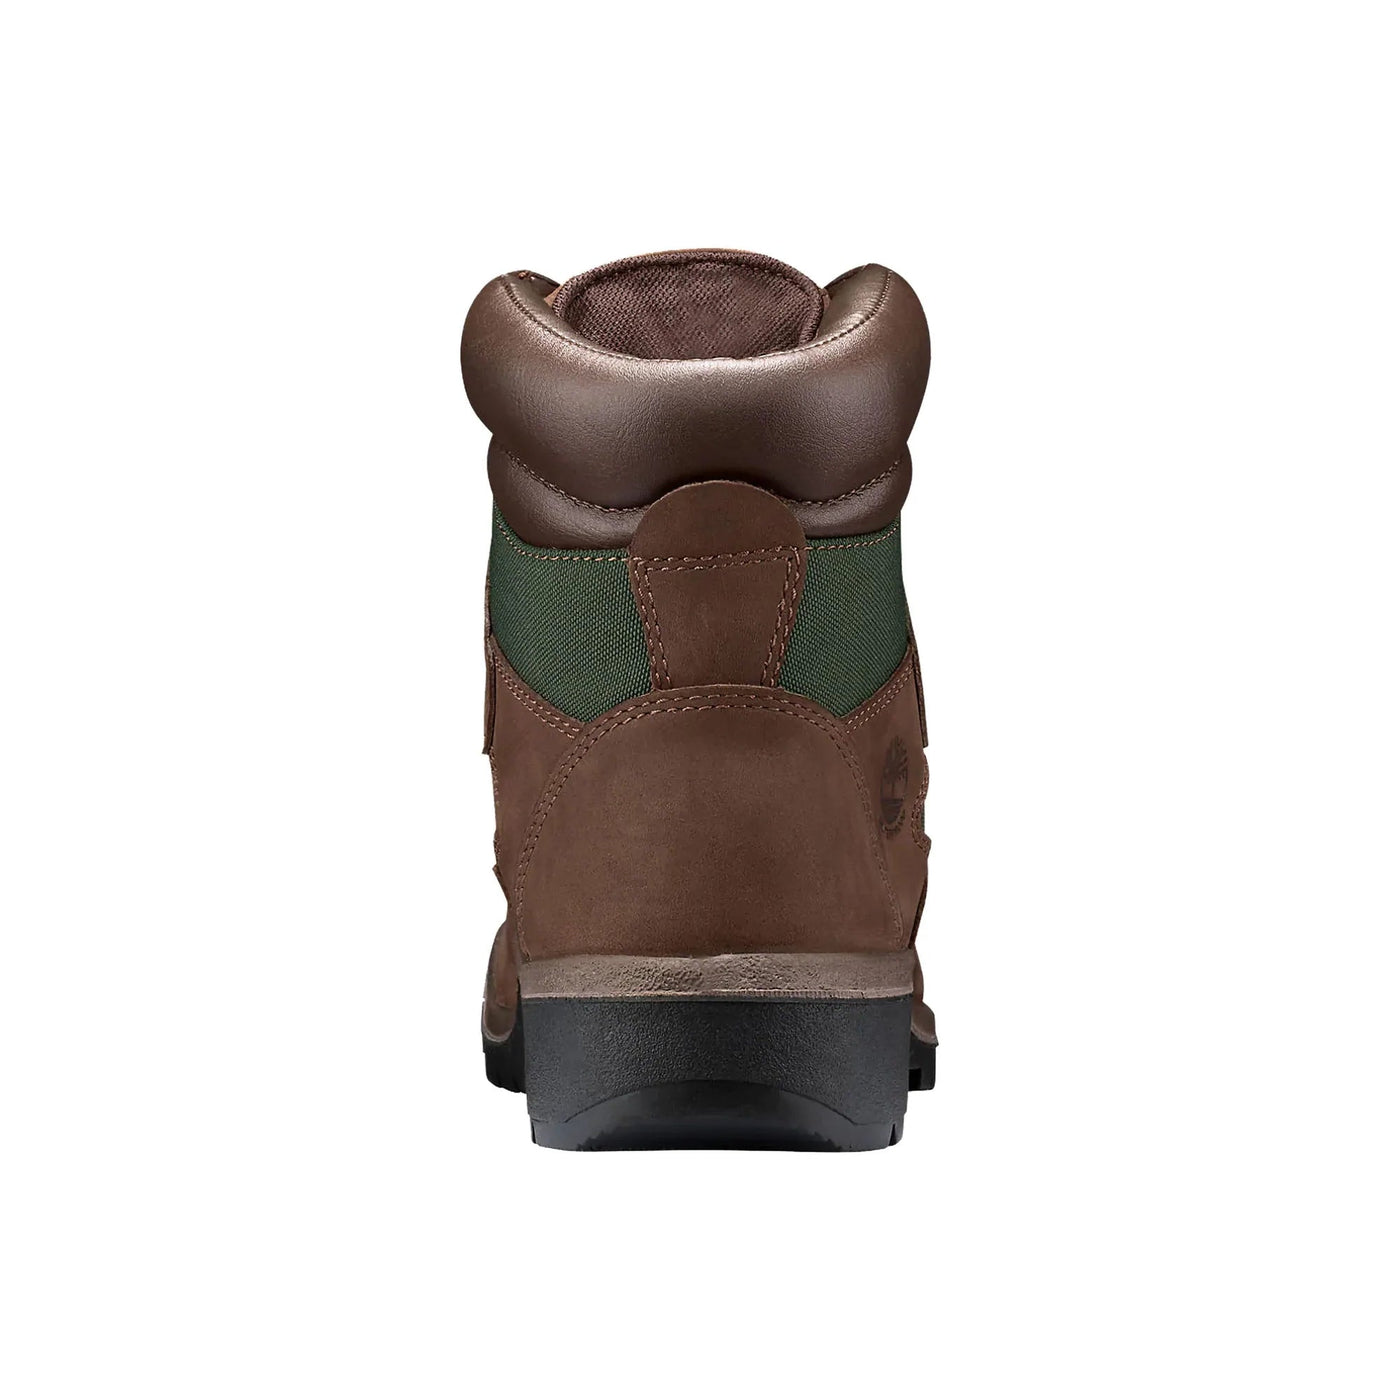 Timberland 6" Field Boot 'Beef and Broccoli' Brown/Green Waterproof - West